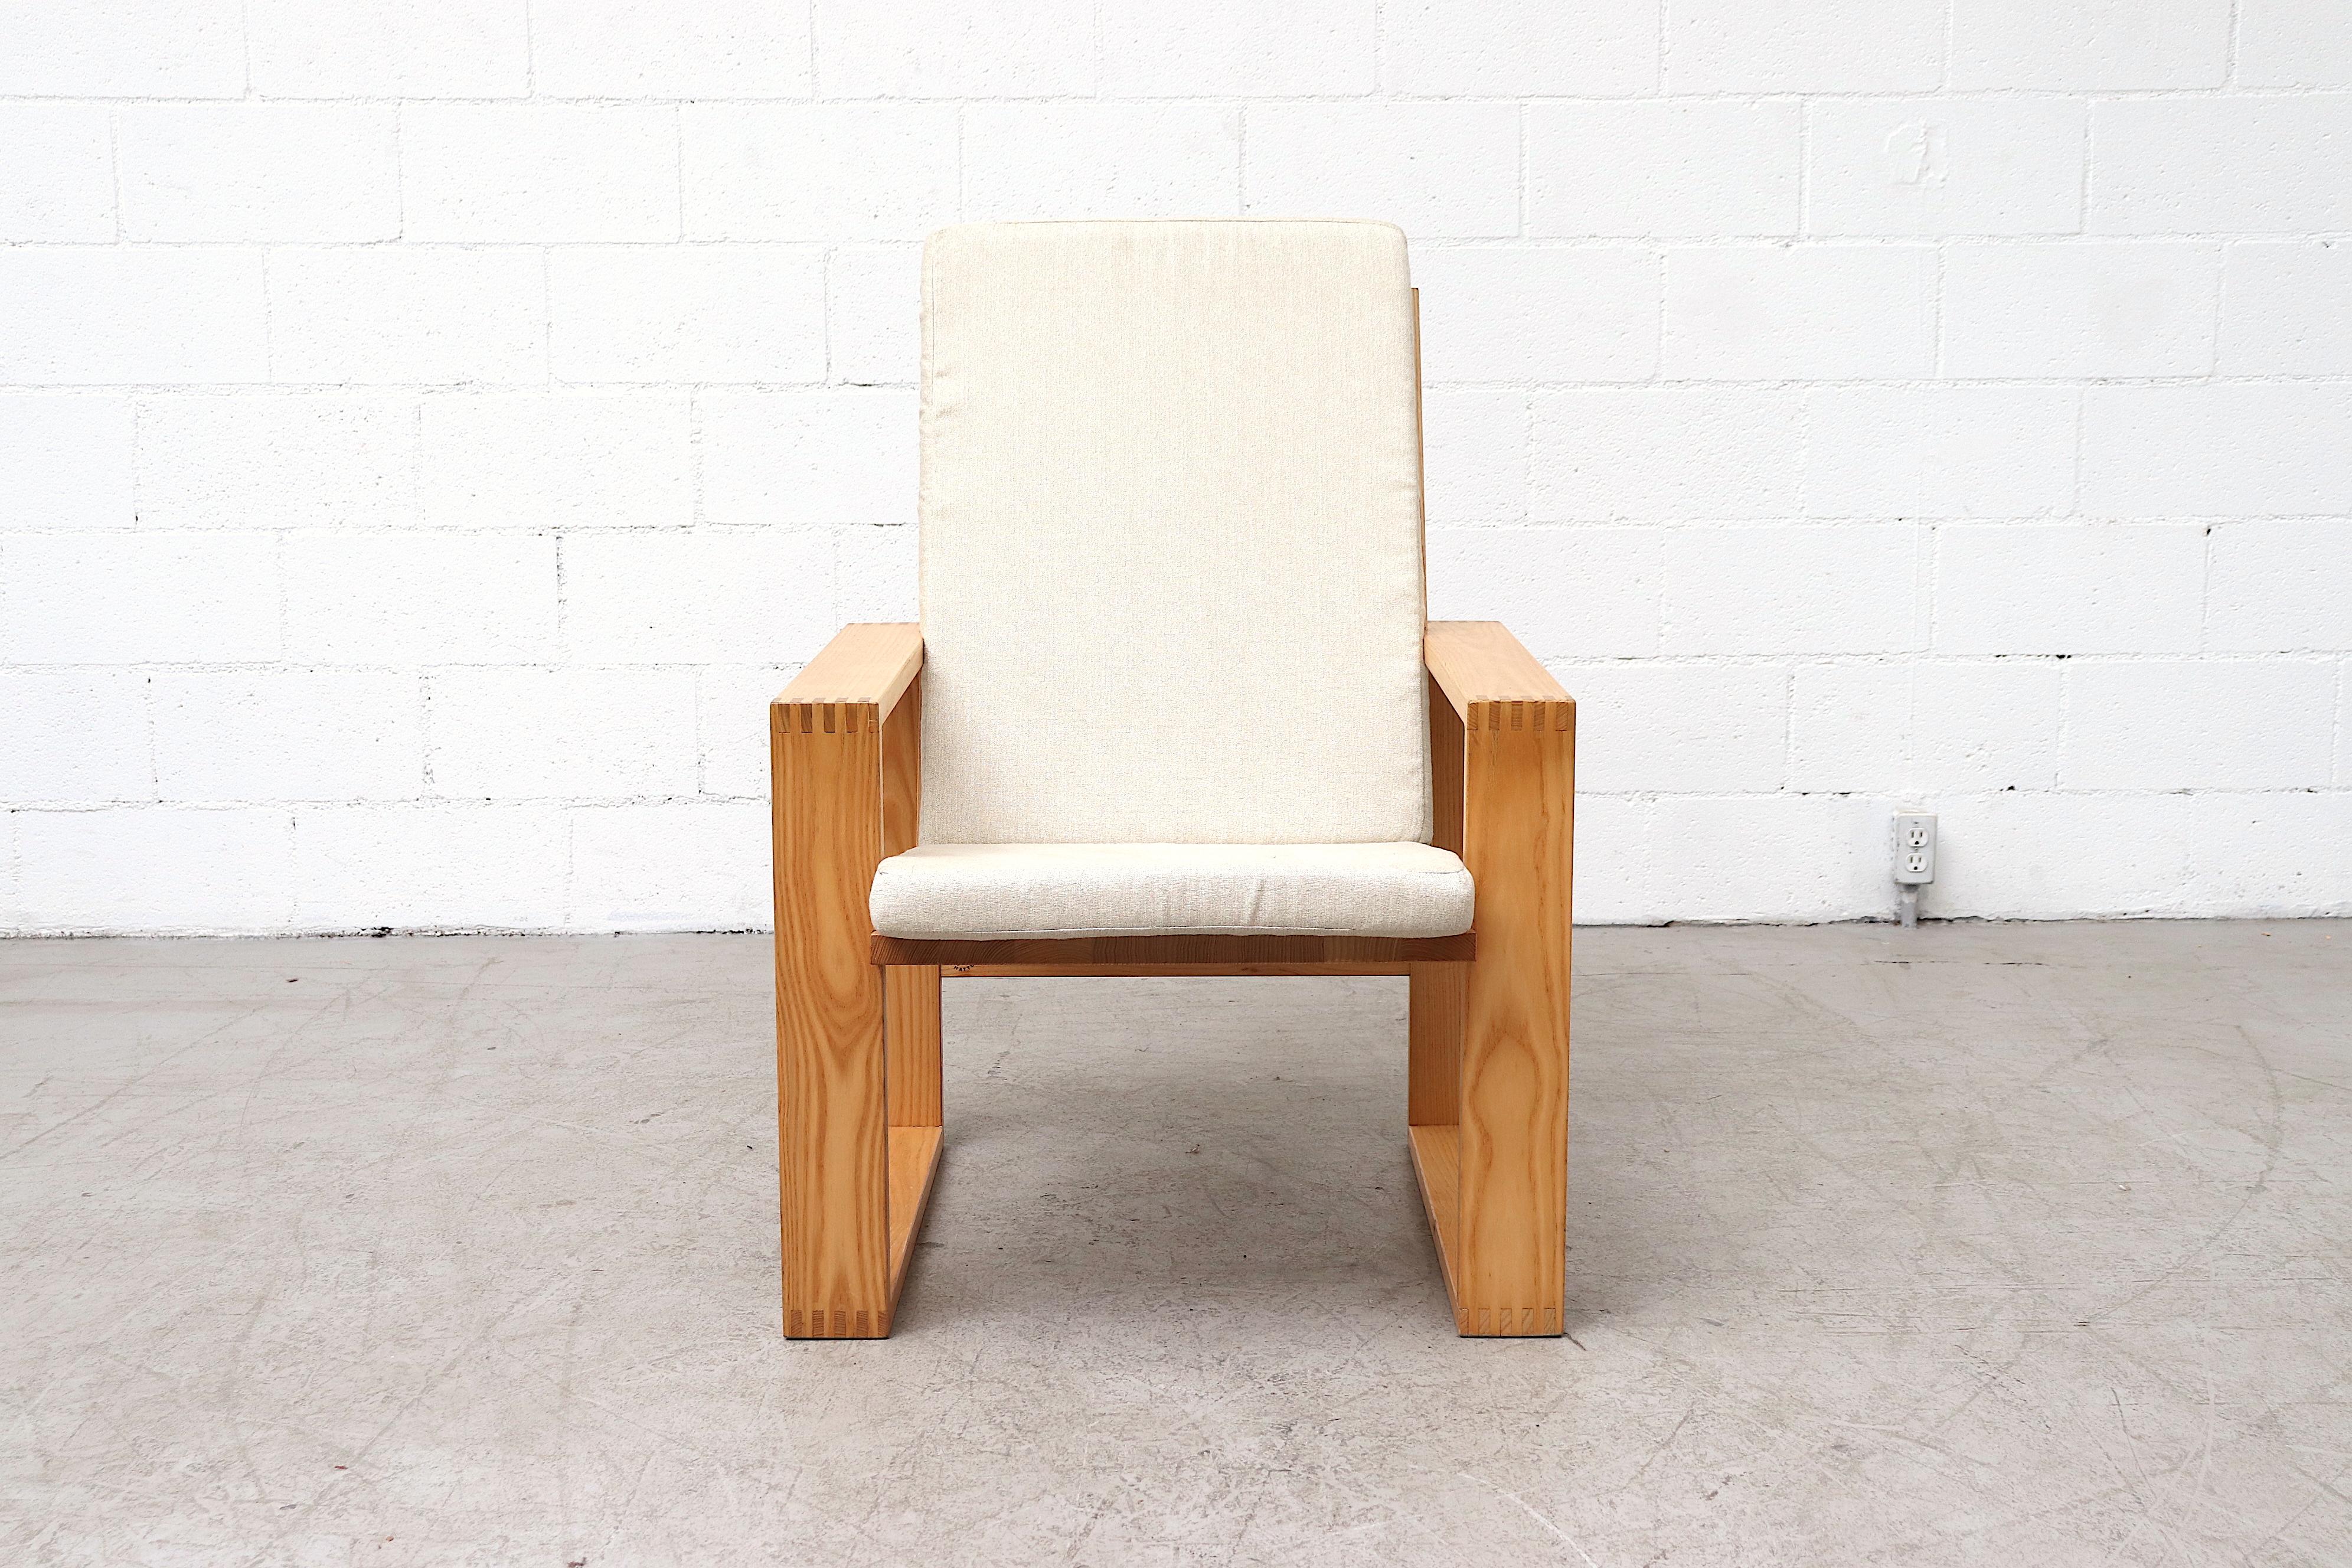 Great pair of pine Ate Van Apeldoorn high back lounge chairs with bone white upholstered cushions. Handsome square design. In good overall condition with visible wear to frame. Wear is consistent with their age and usage. Set price.